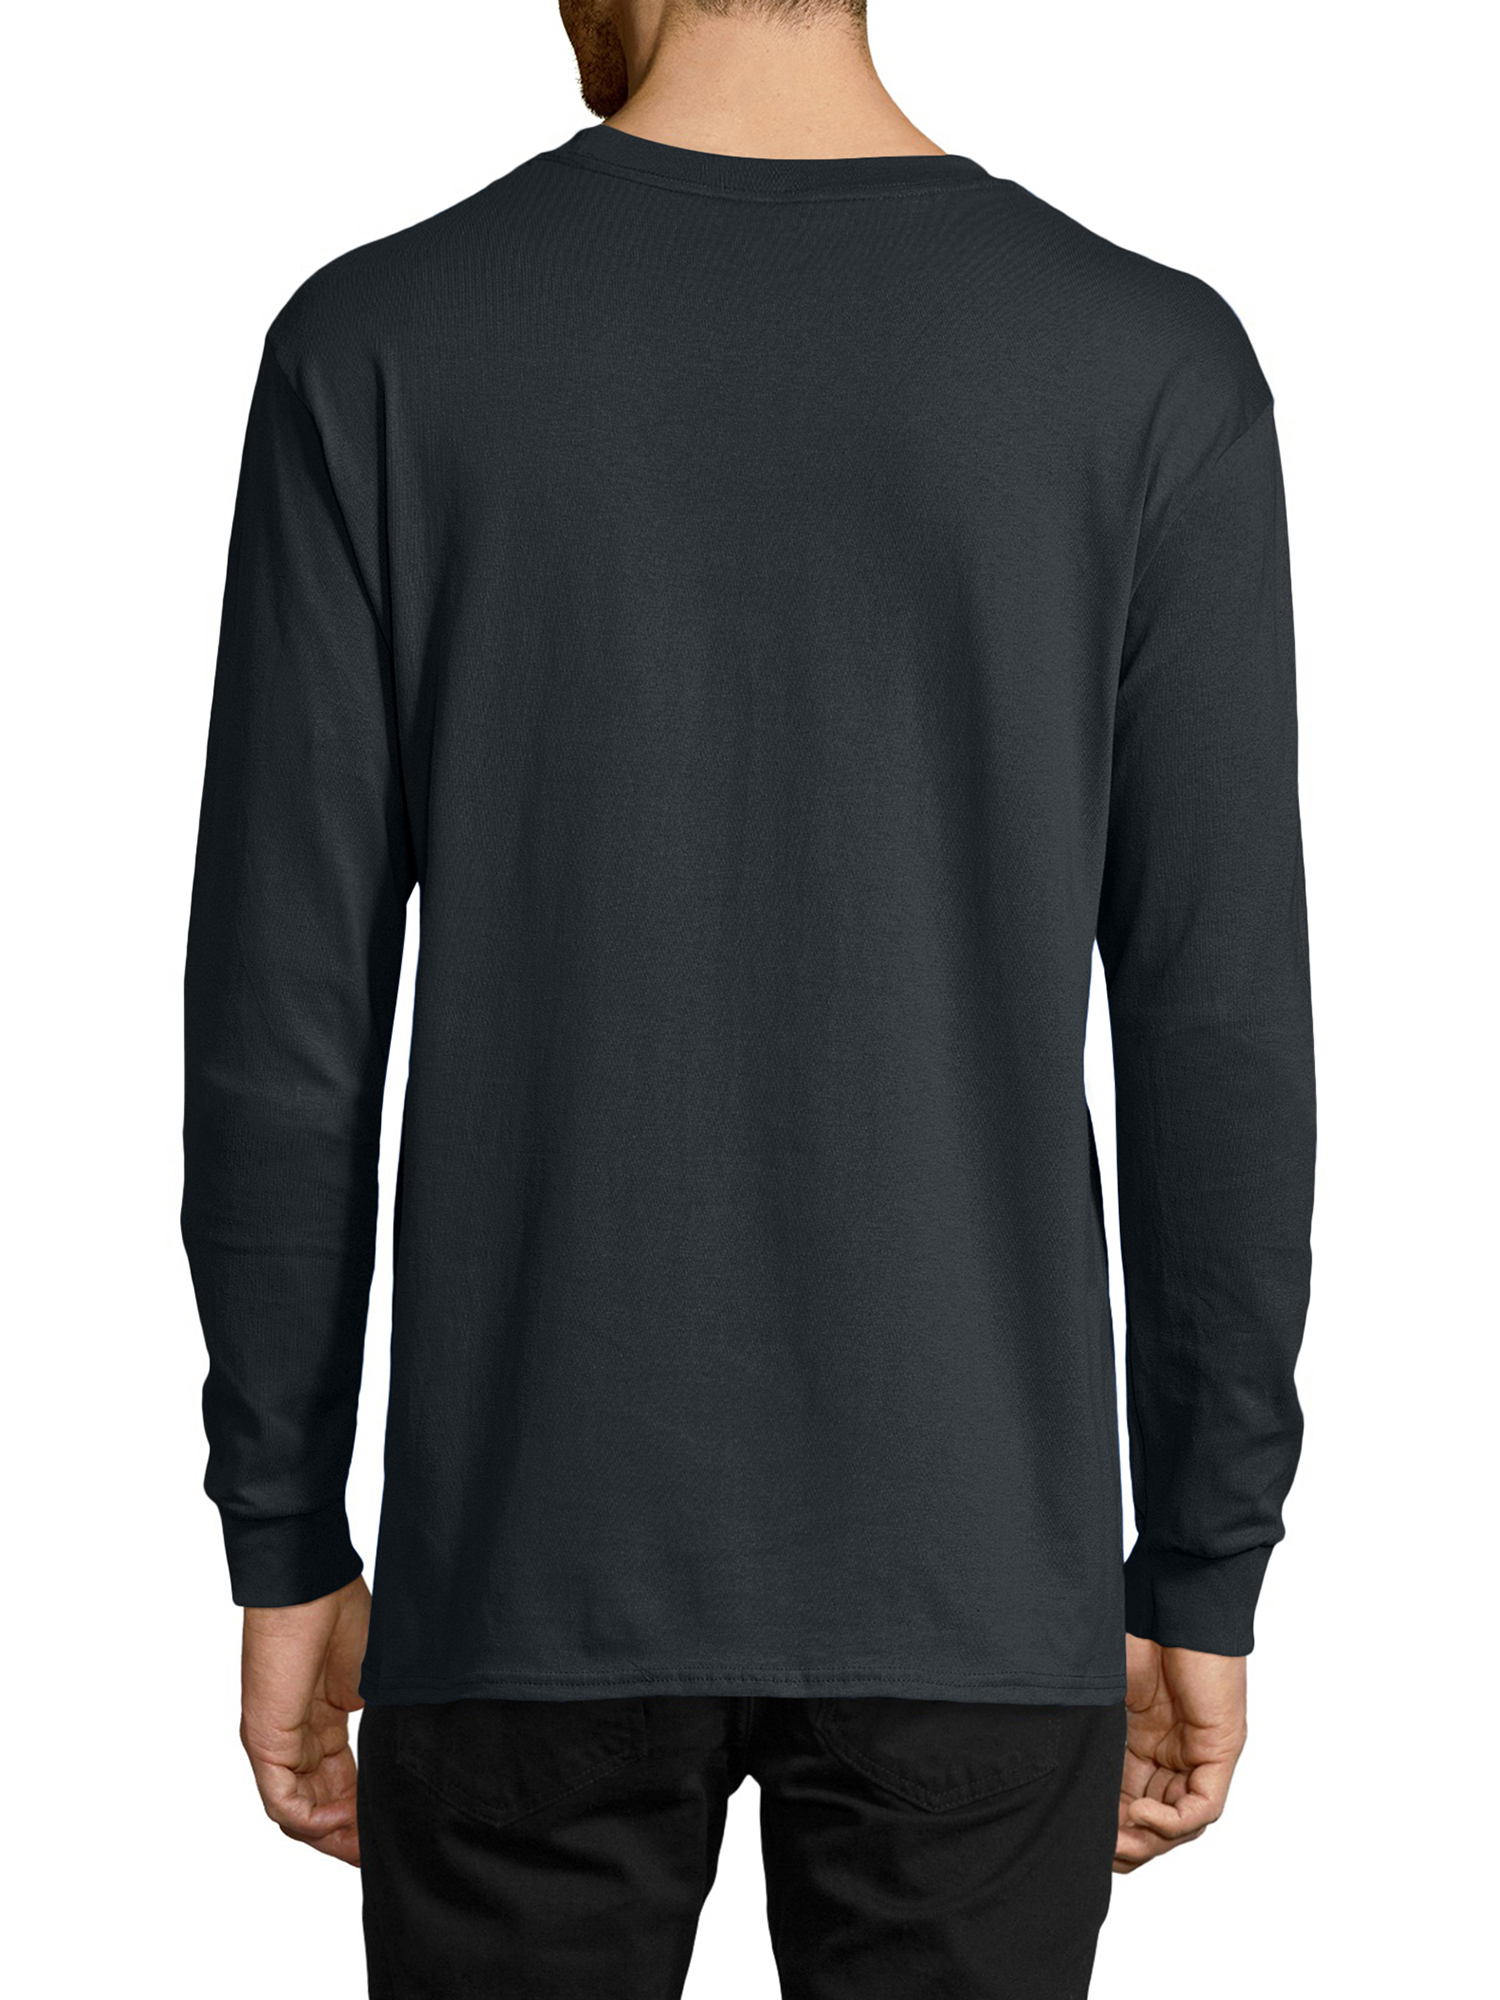 Hanes Men's and Big Men's ComfortSoft Long Sleeve Tee, Up to Size 3XL ...